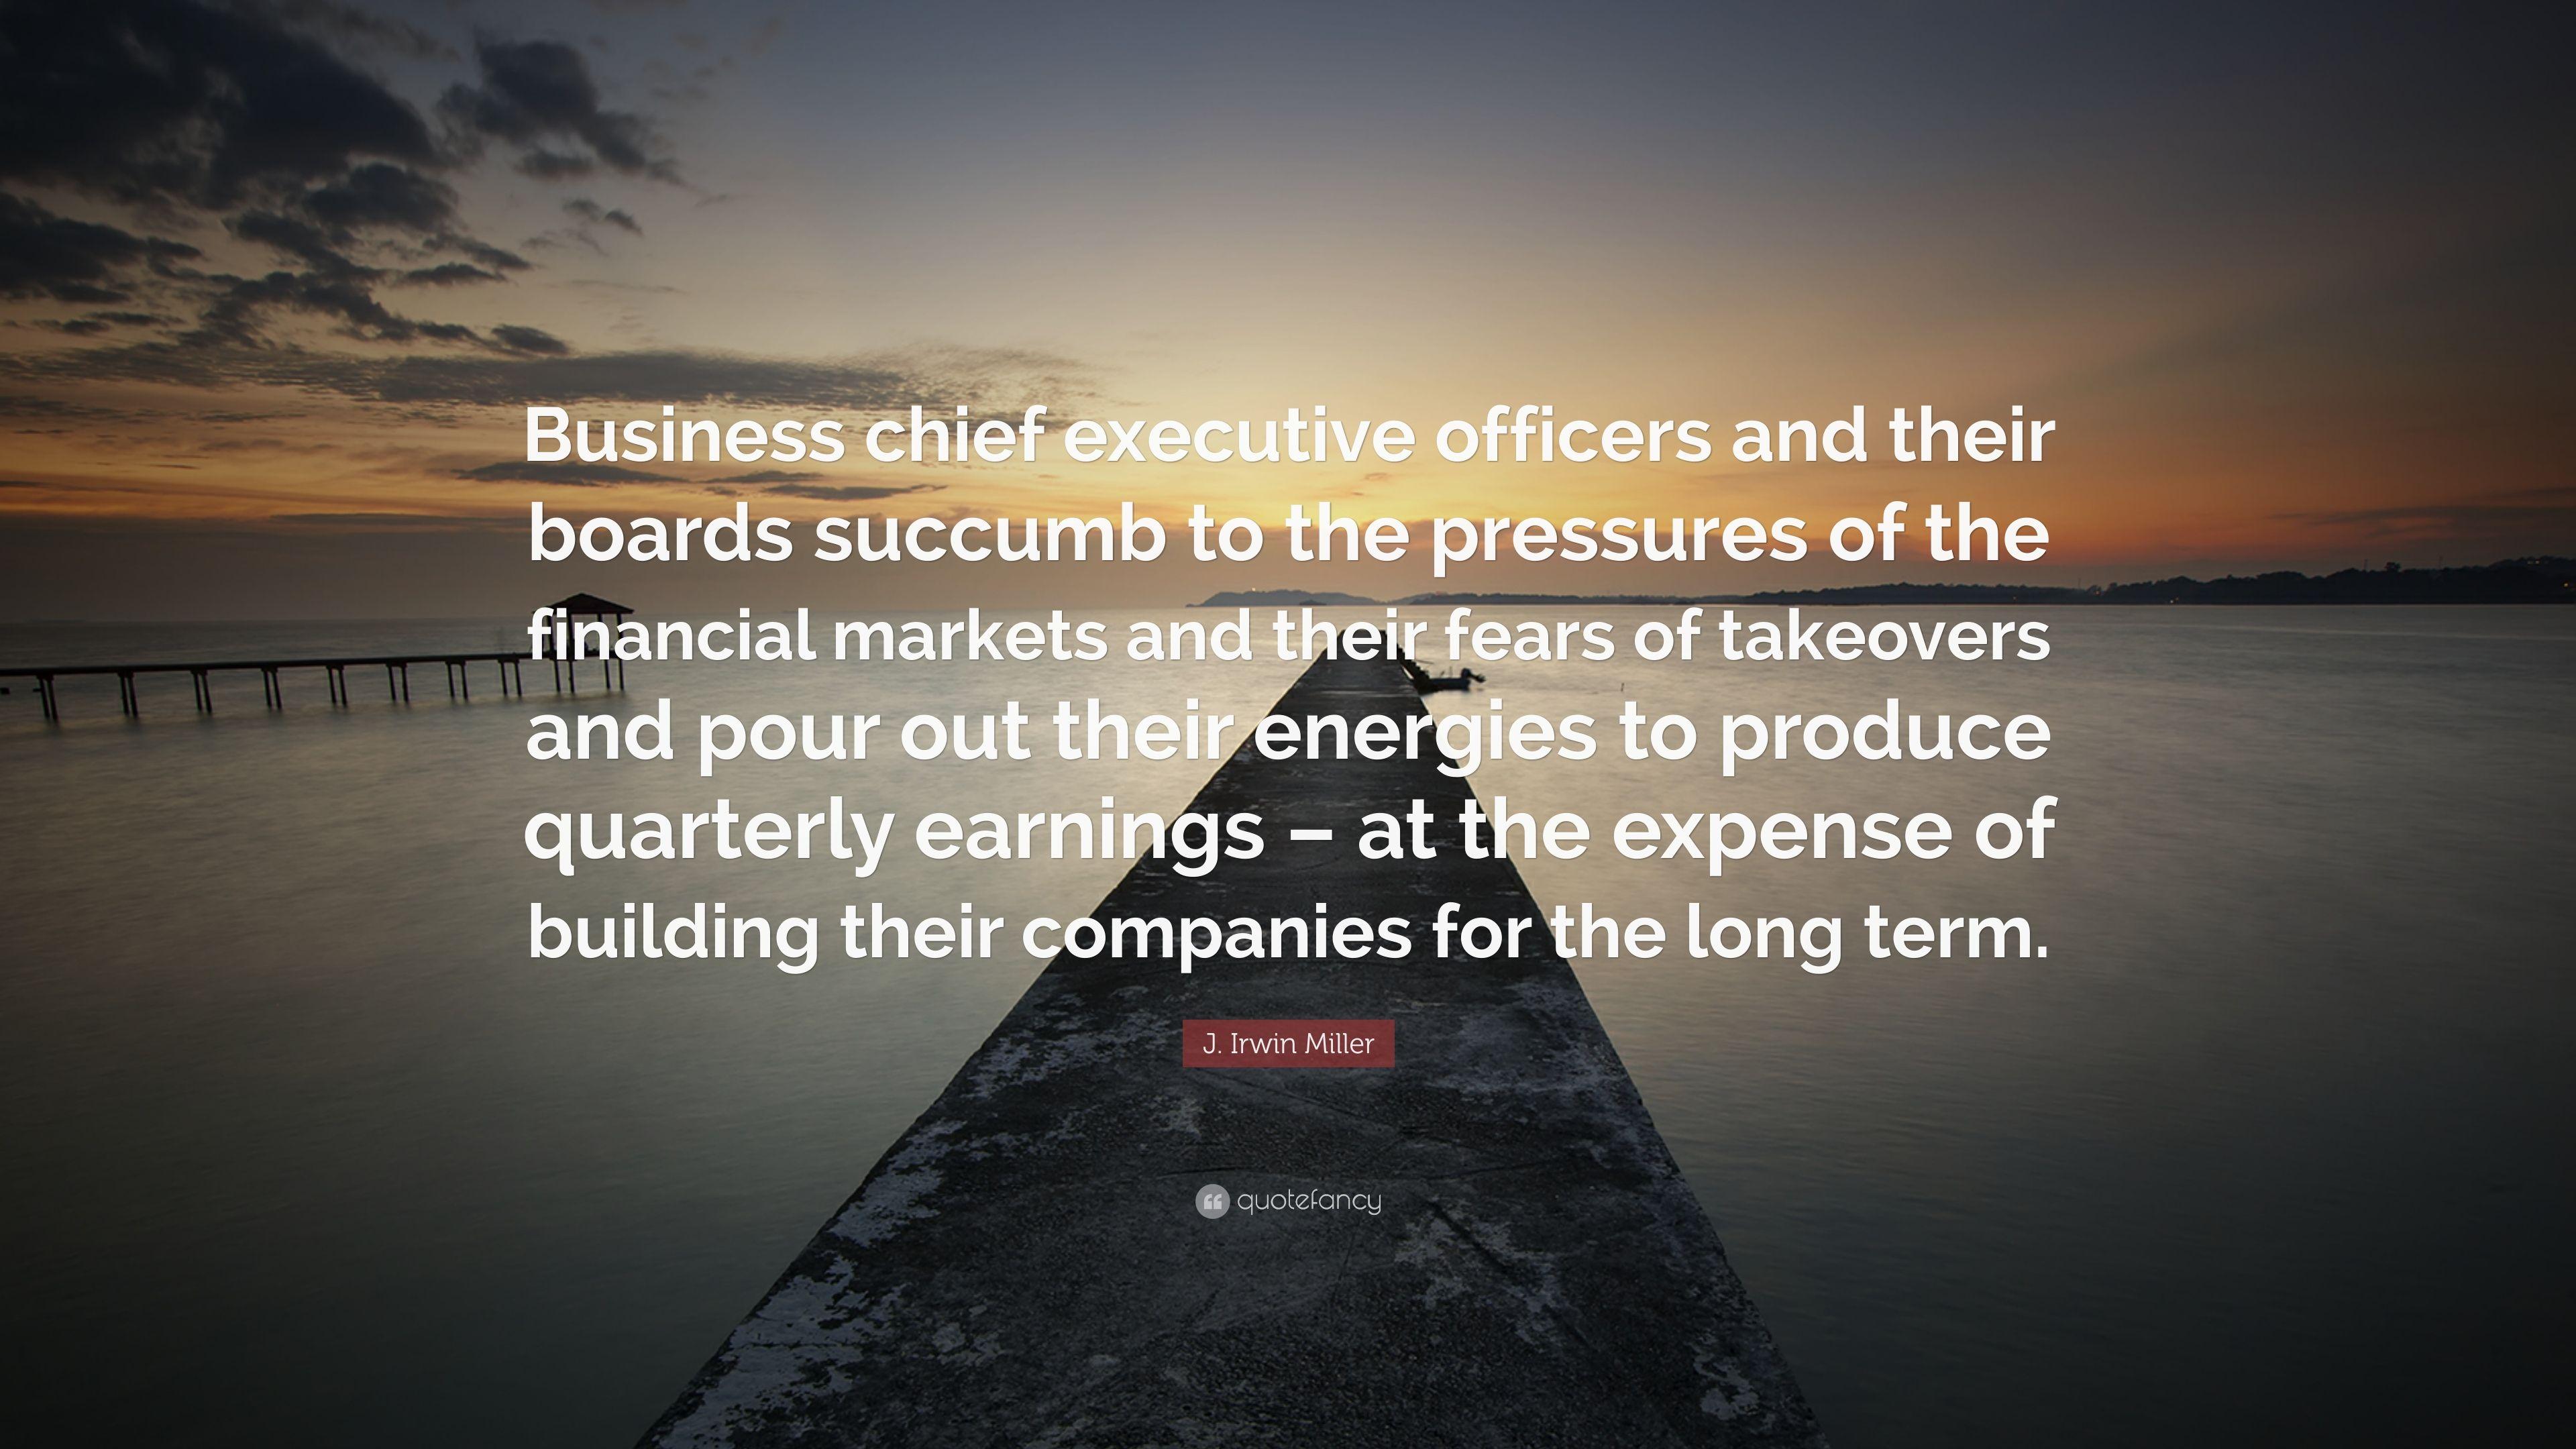 J. Irwin Miller Quote: “Business chief executive officers and their